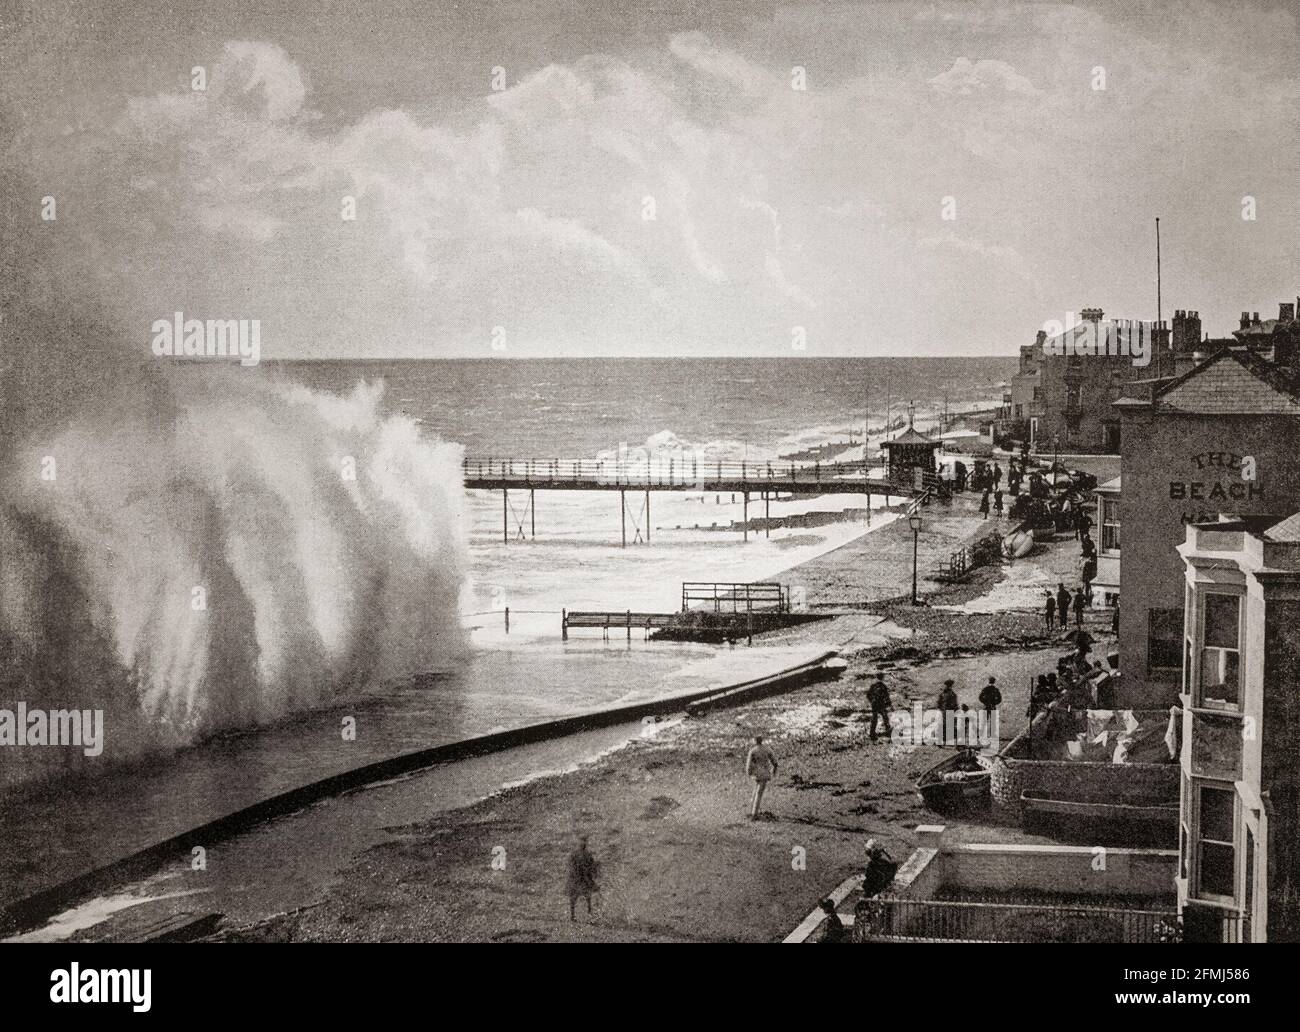 A late 19th Century view of a stormy day at Bognor Regis, a town and seaside resort on the English Channel in West Sussex on the south coast of England. Stock Photo